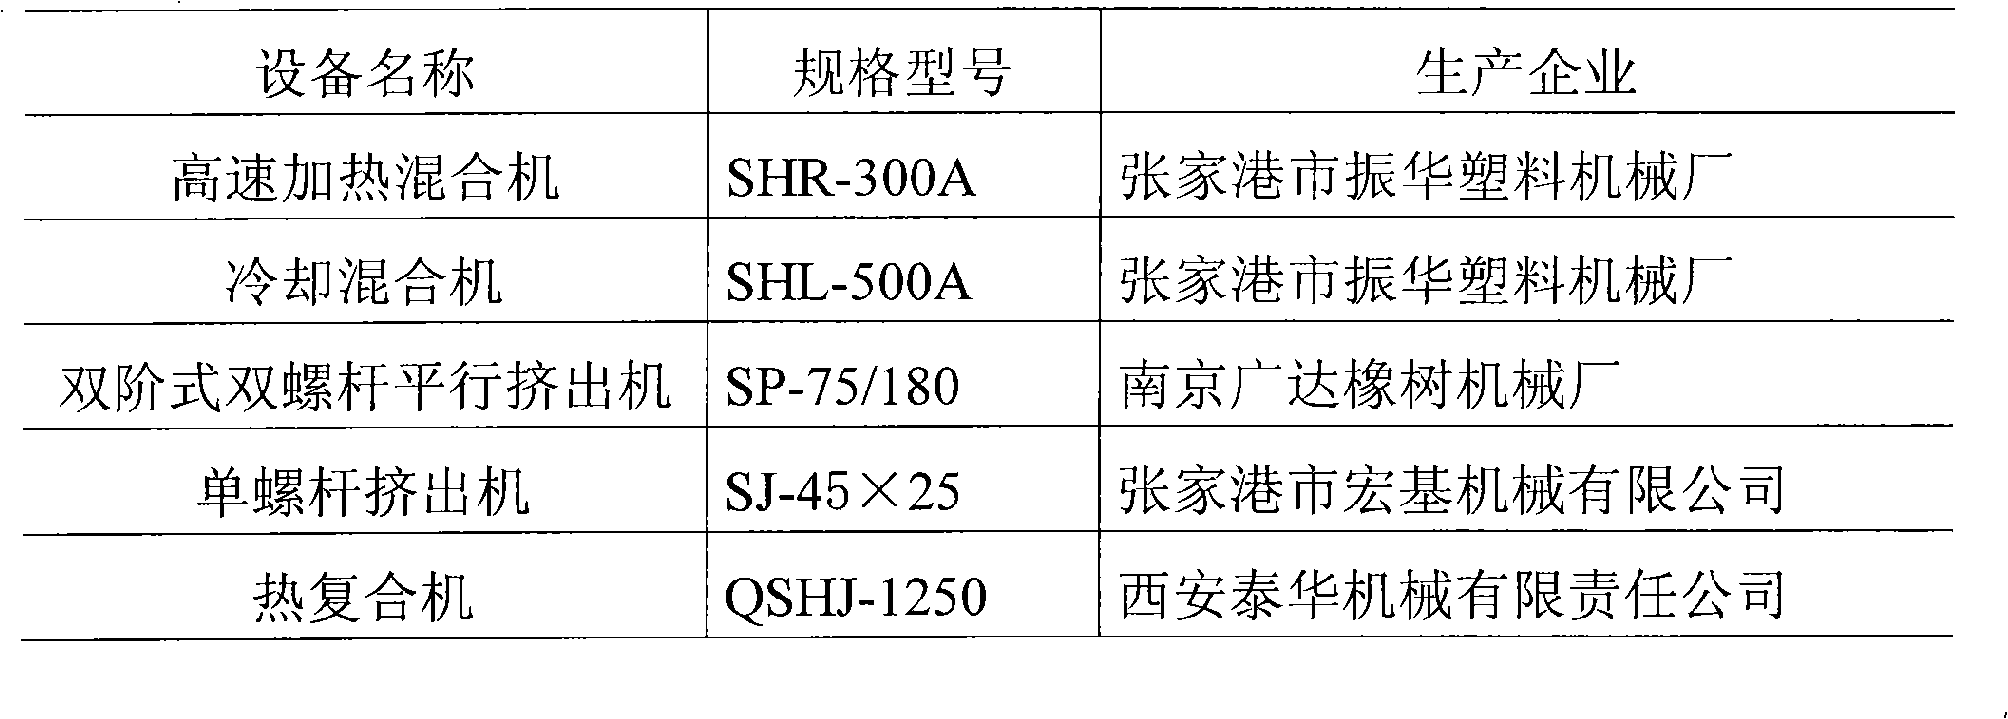 Multifunctional composite sheet material and process for making same